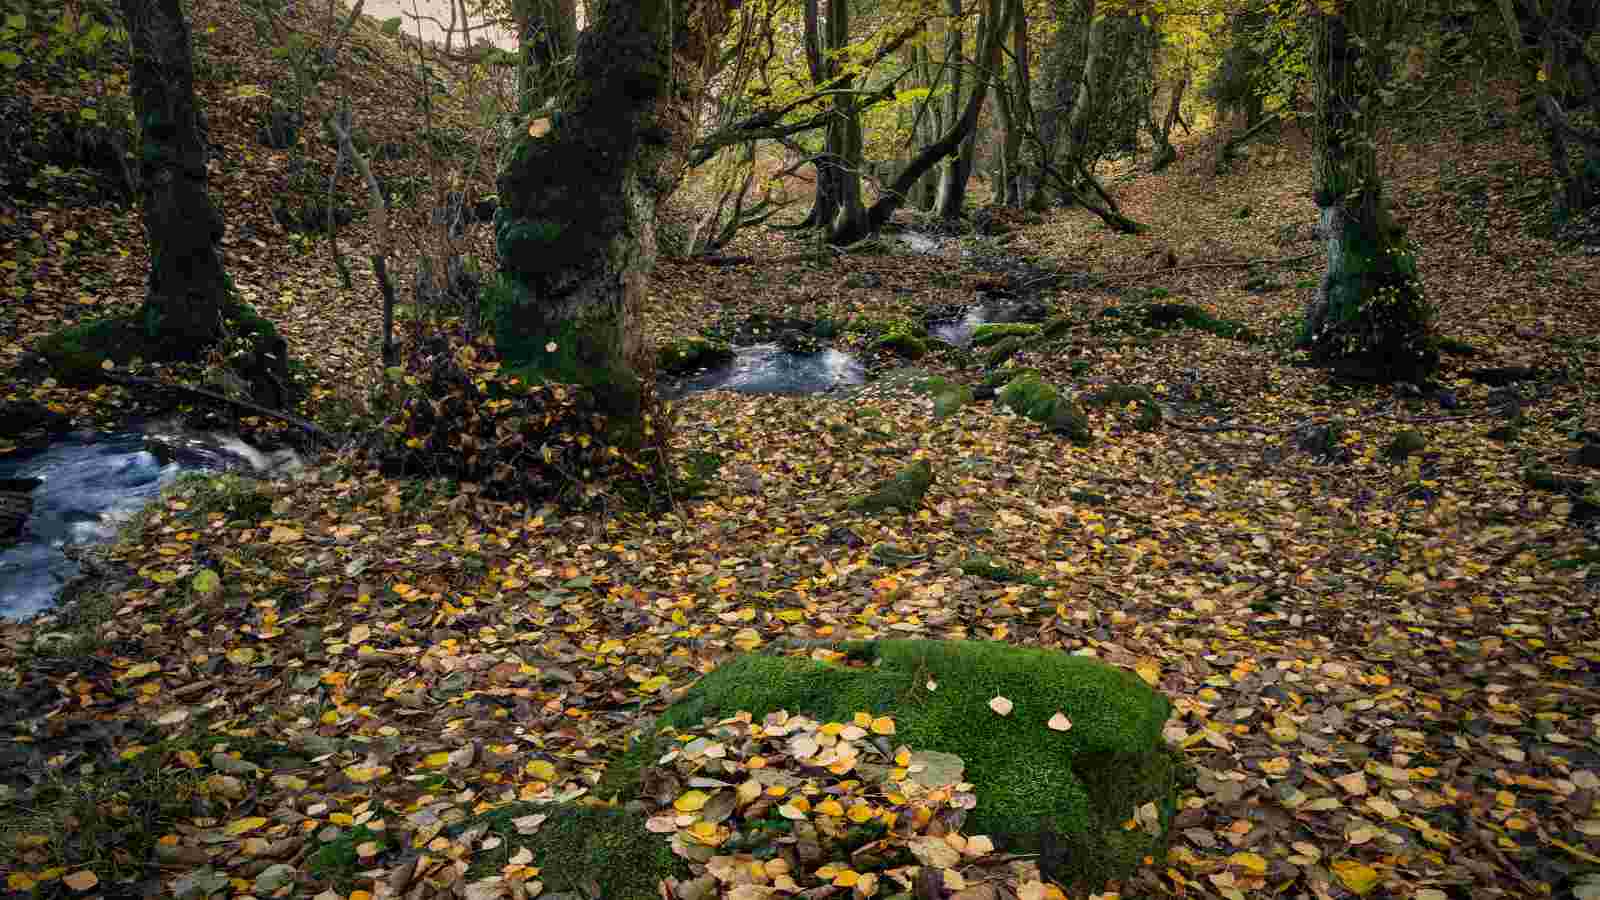 leaves on the ground in a forest with a stream